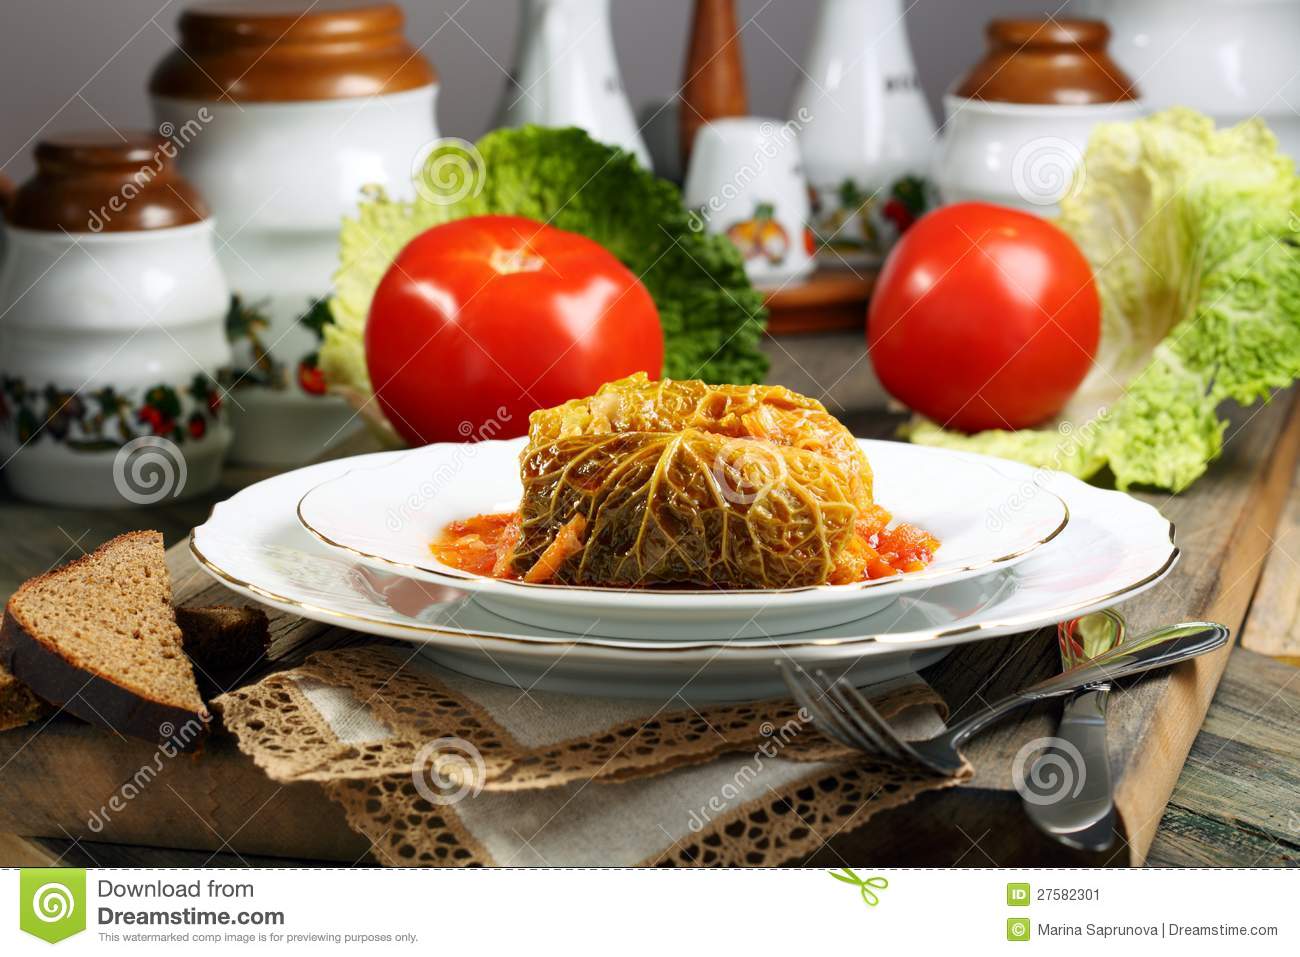 Cabbage Rolls Stuffed With Meat  Stock Image   Image  27582301